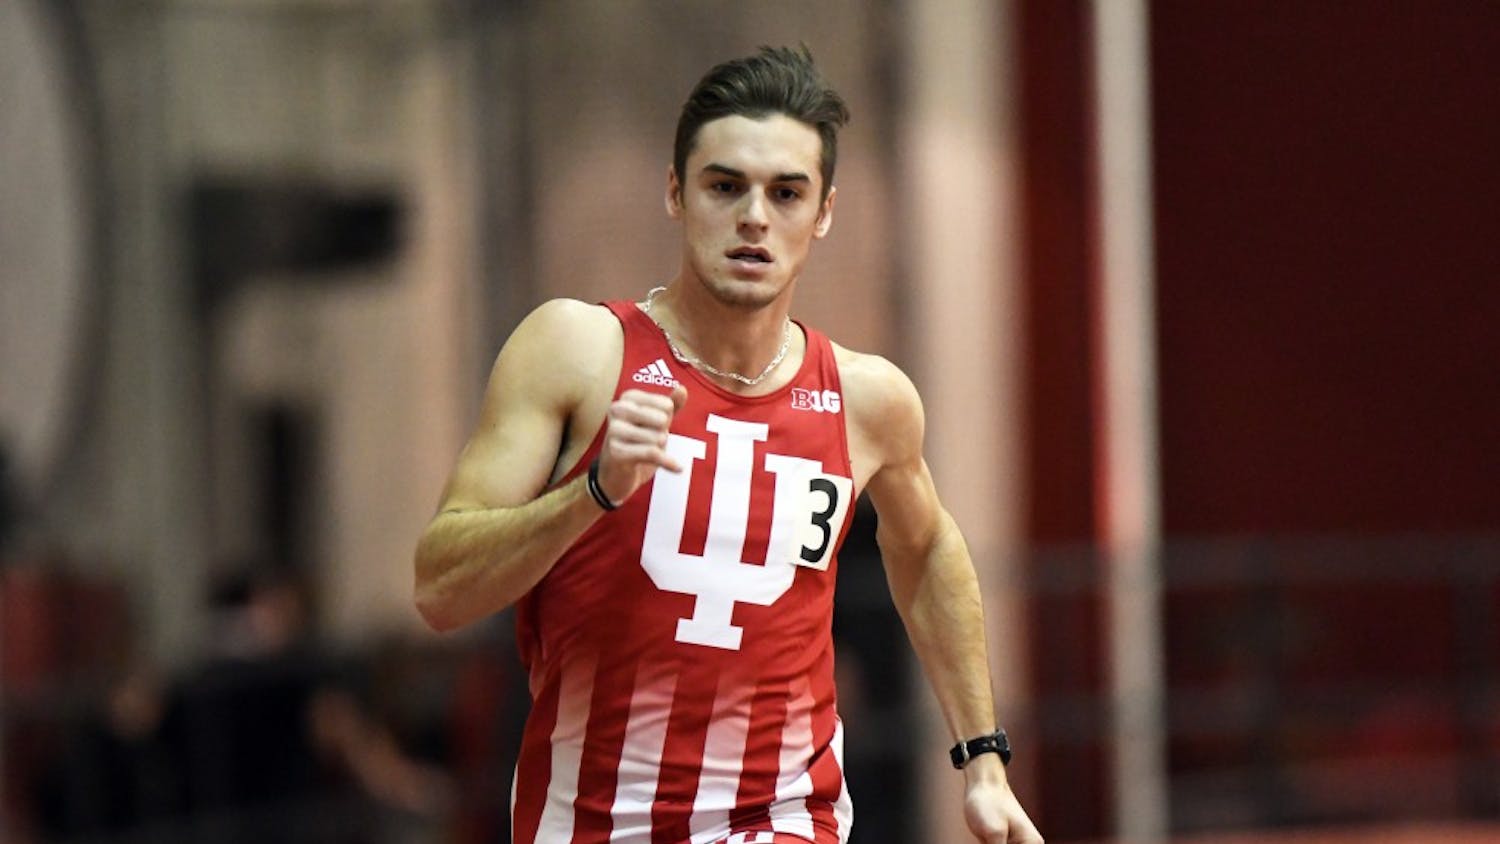 Senior Daniel Kuhn races in the 400m dash against Tennessee on January 6 in Harry Gladstein Fieldhouse. The IU men tied Tennessee, 59-59.